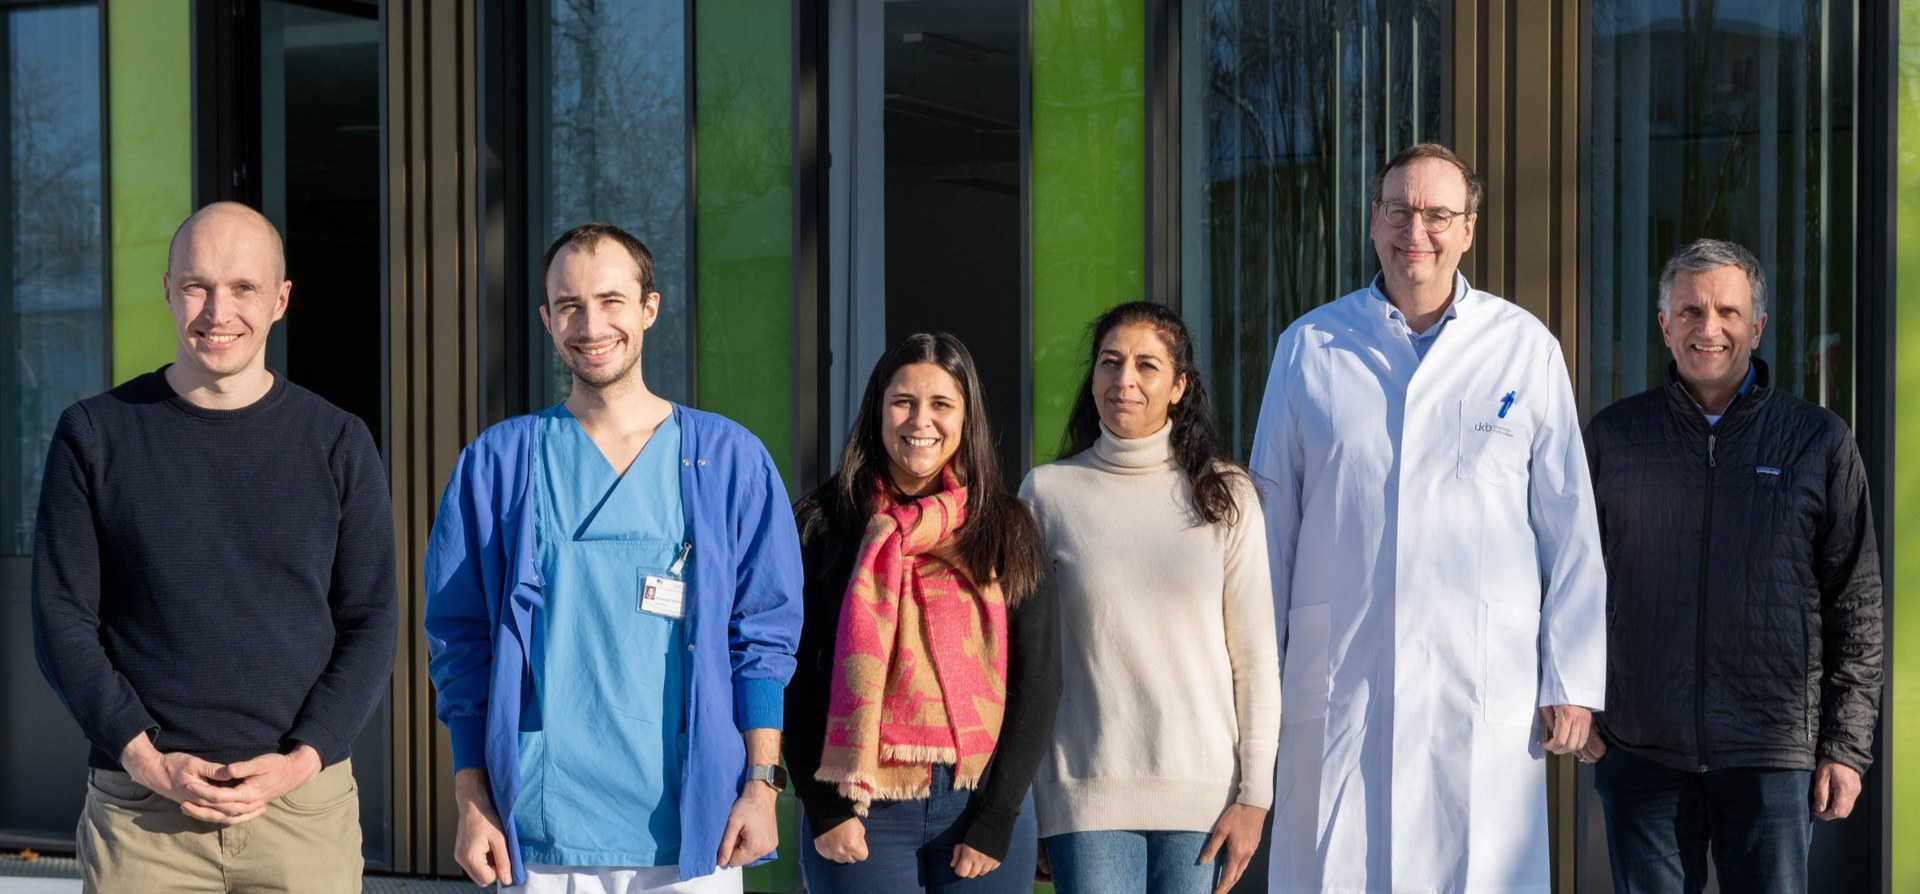 Bonn researchers gain completely new insights into kidney diseases thanks to automated image analysis: (from left) Alexander Effland, Alexander Böhner, Alice Jacob, Zeinab Abdullah, Christian Kurts and Martin Rumpf